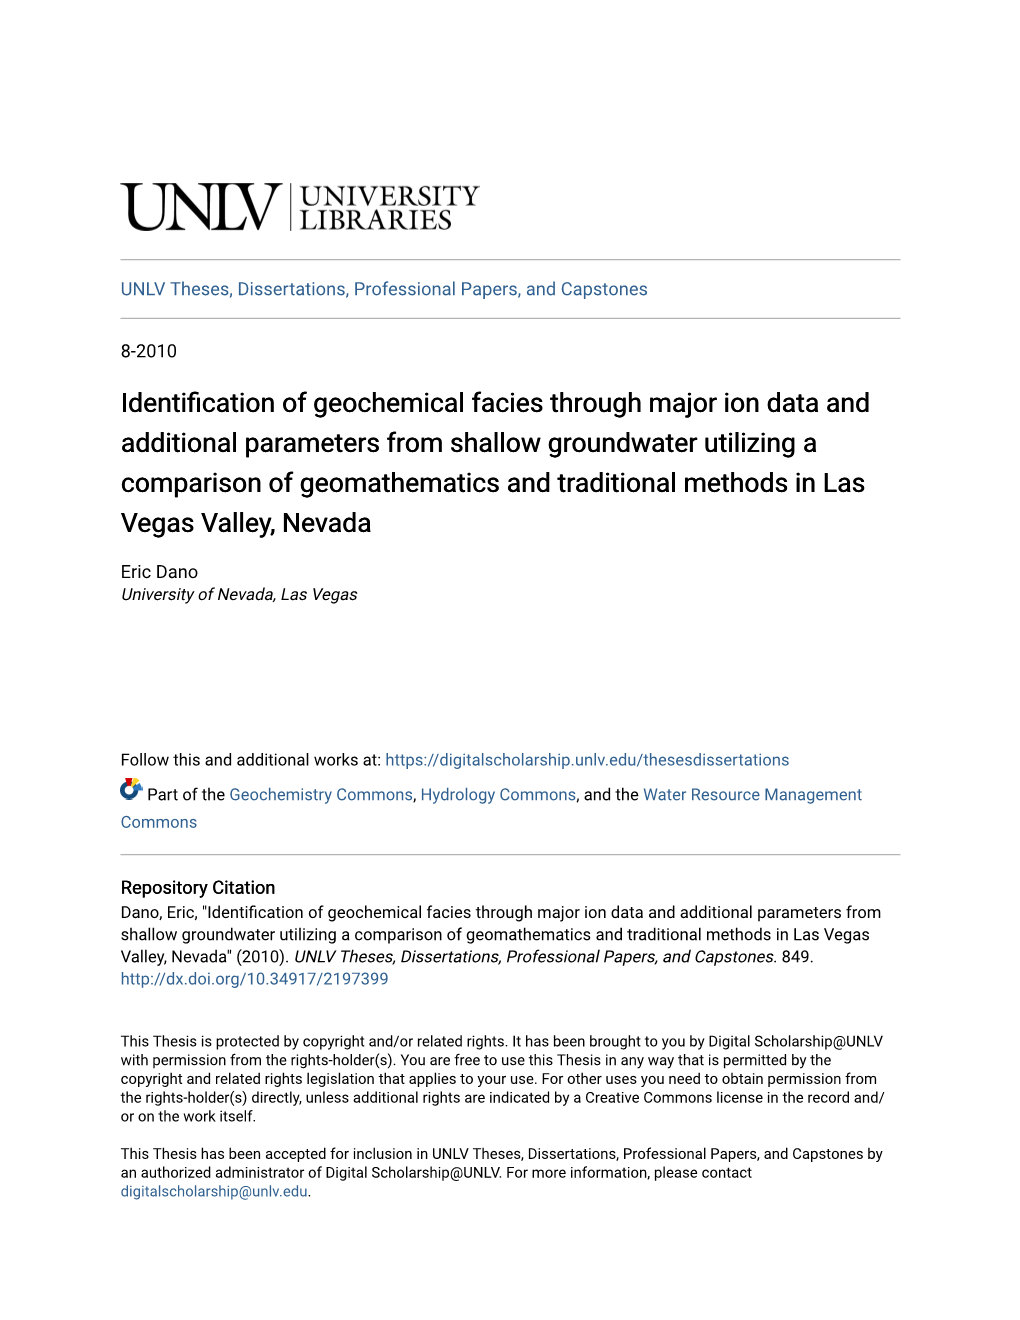 Identification of Geochemical Facies Through Major Ion Data And